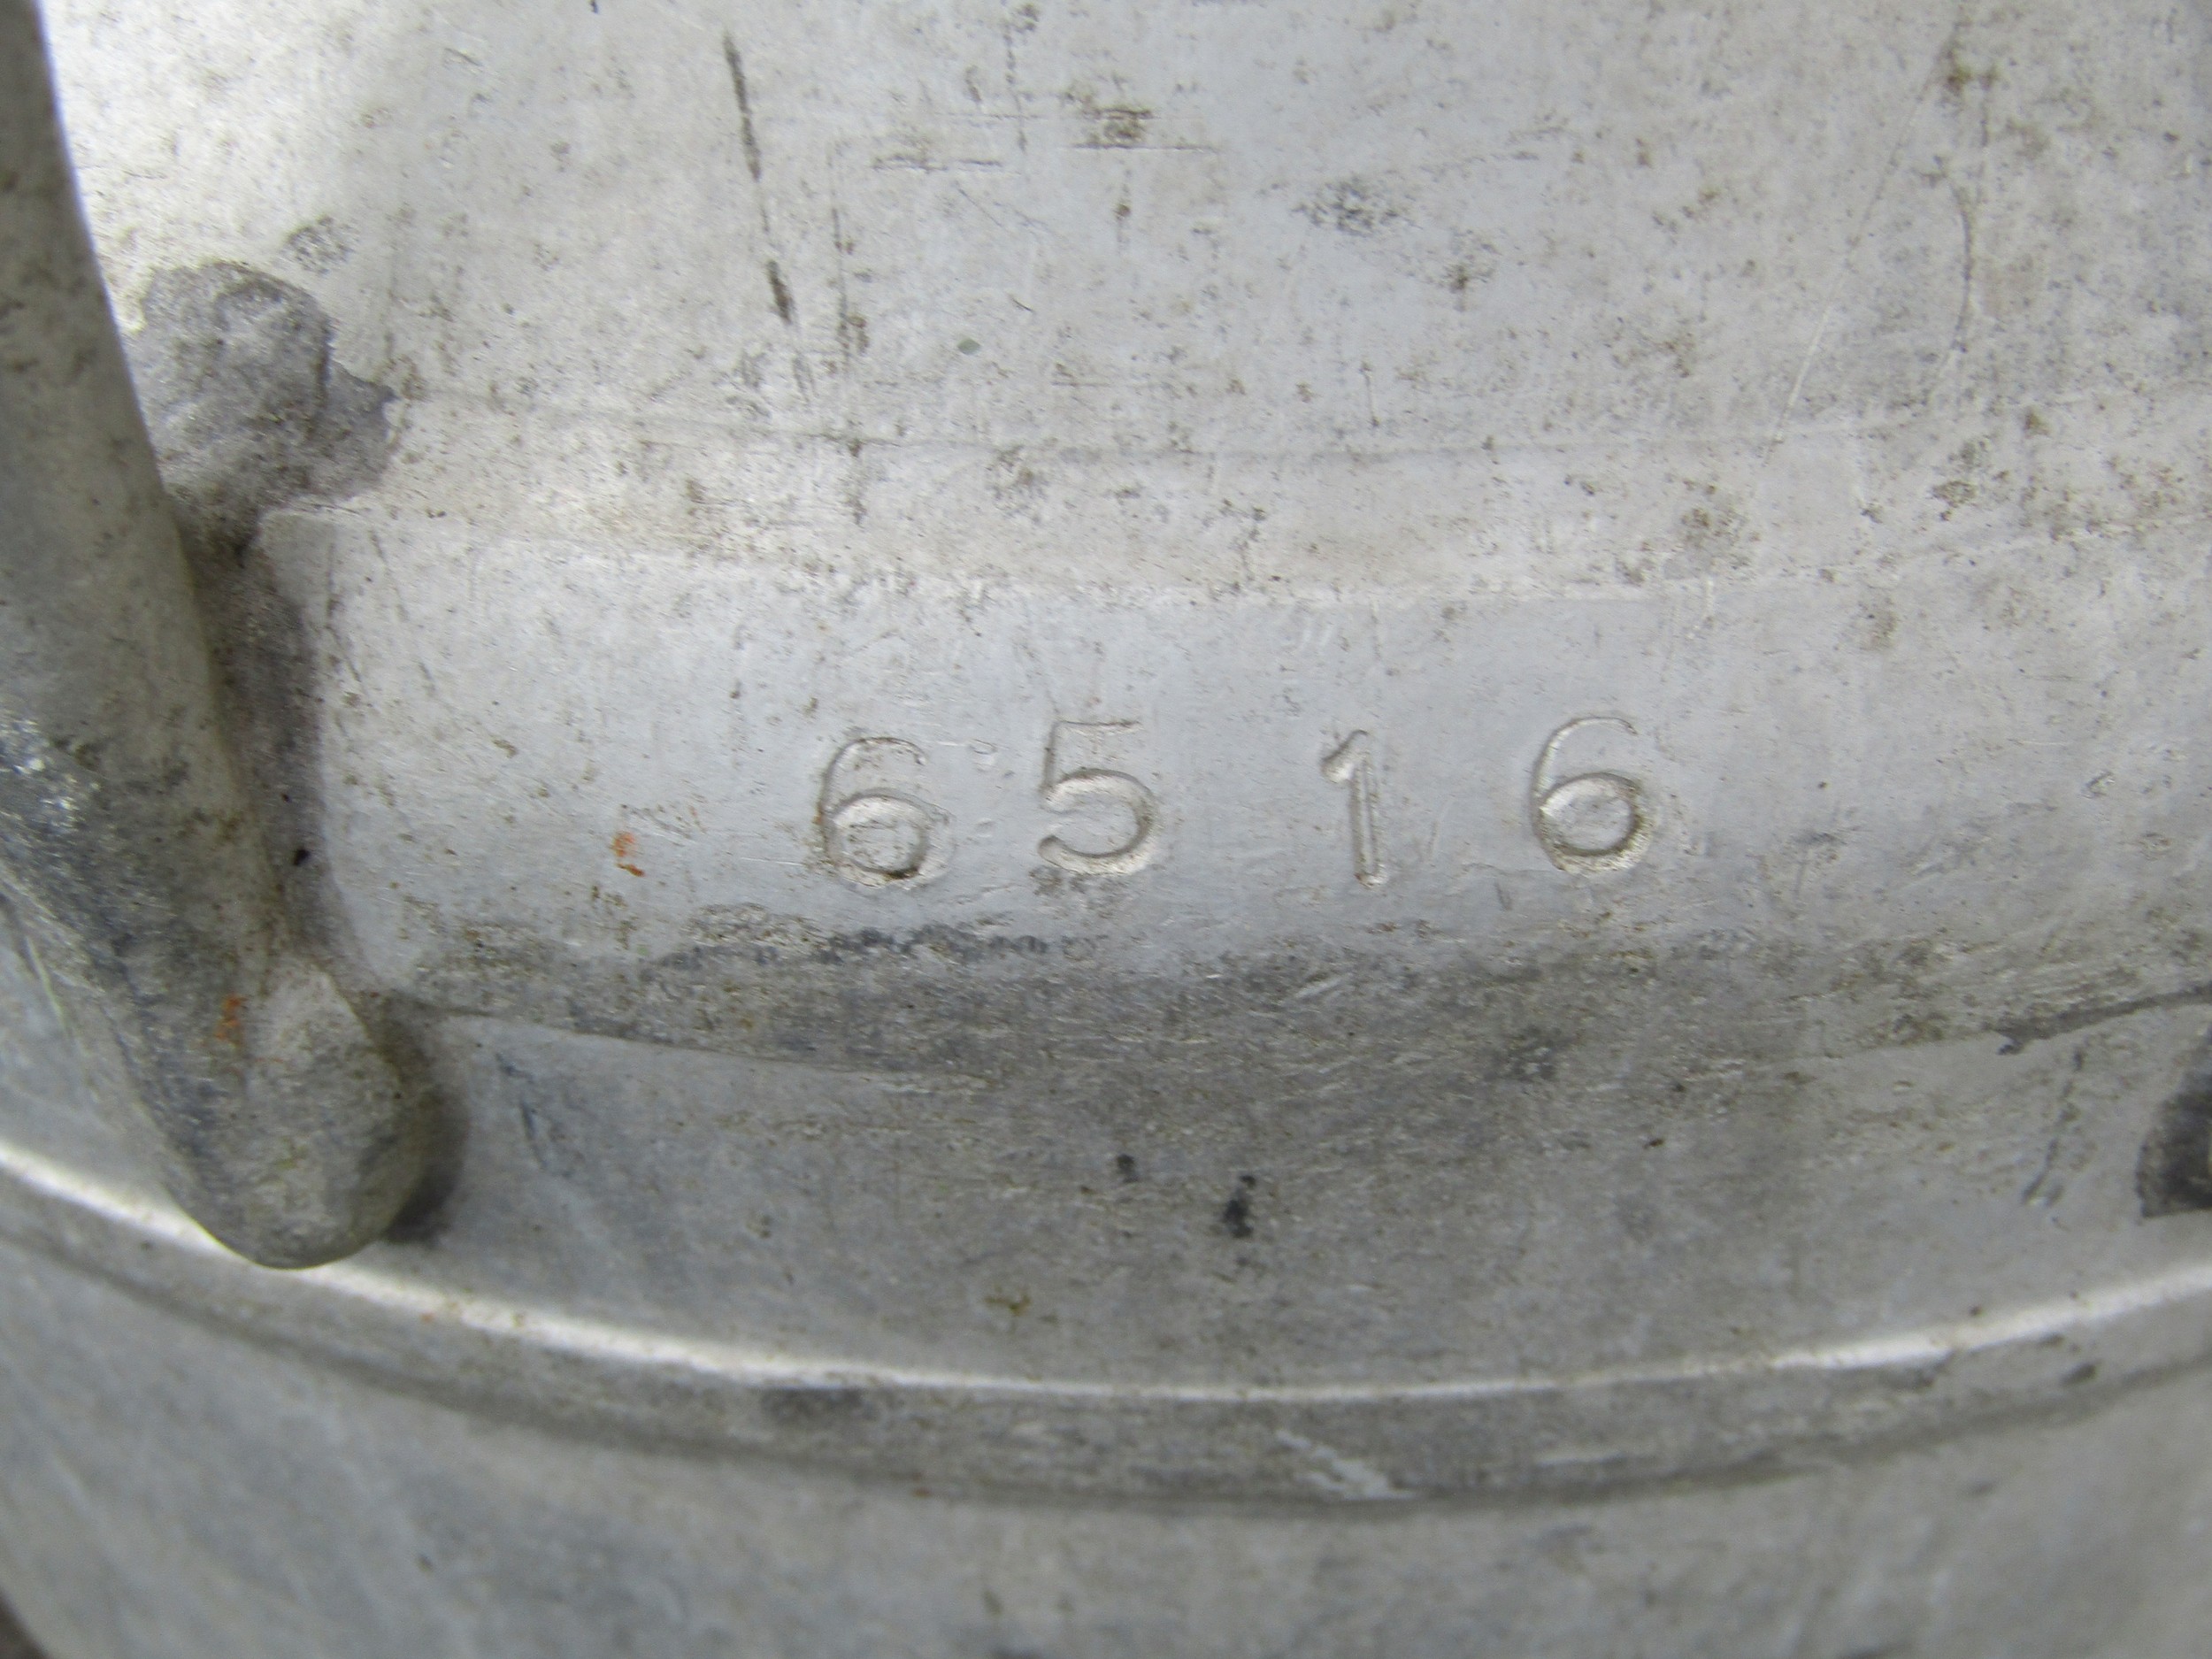 A Grundycan Excraven Dairies, Leeds aluminium two handled milk churn (complete with cap), 72 cm high - Image 5 of 5